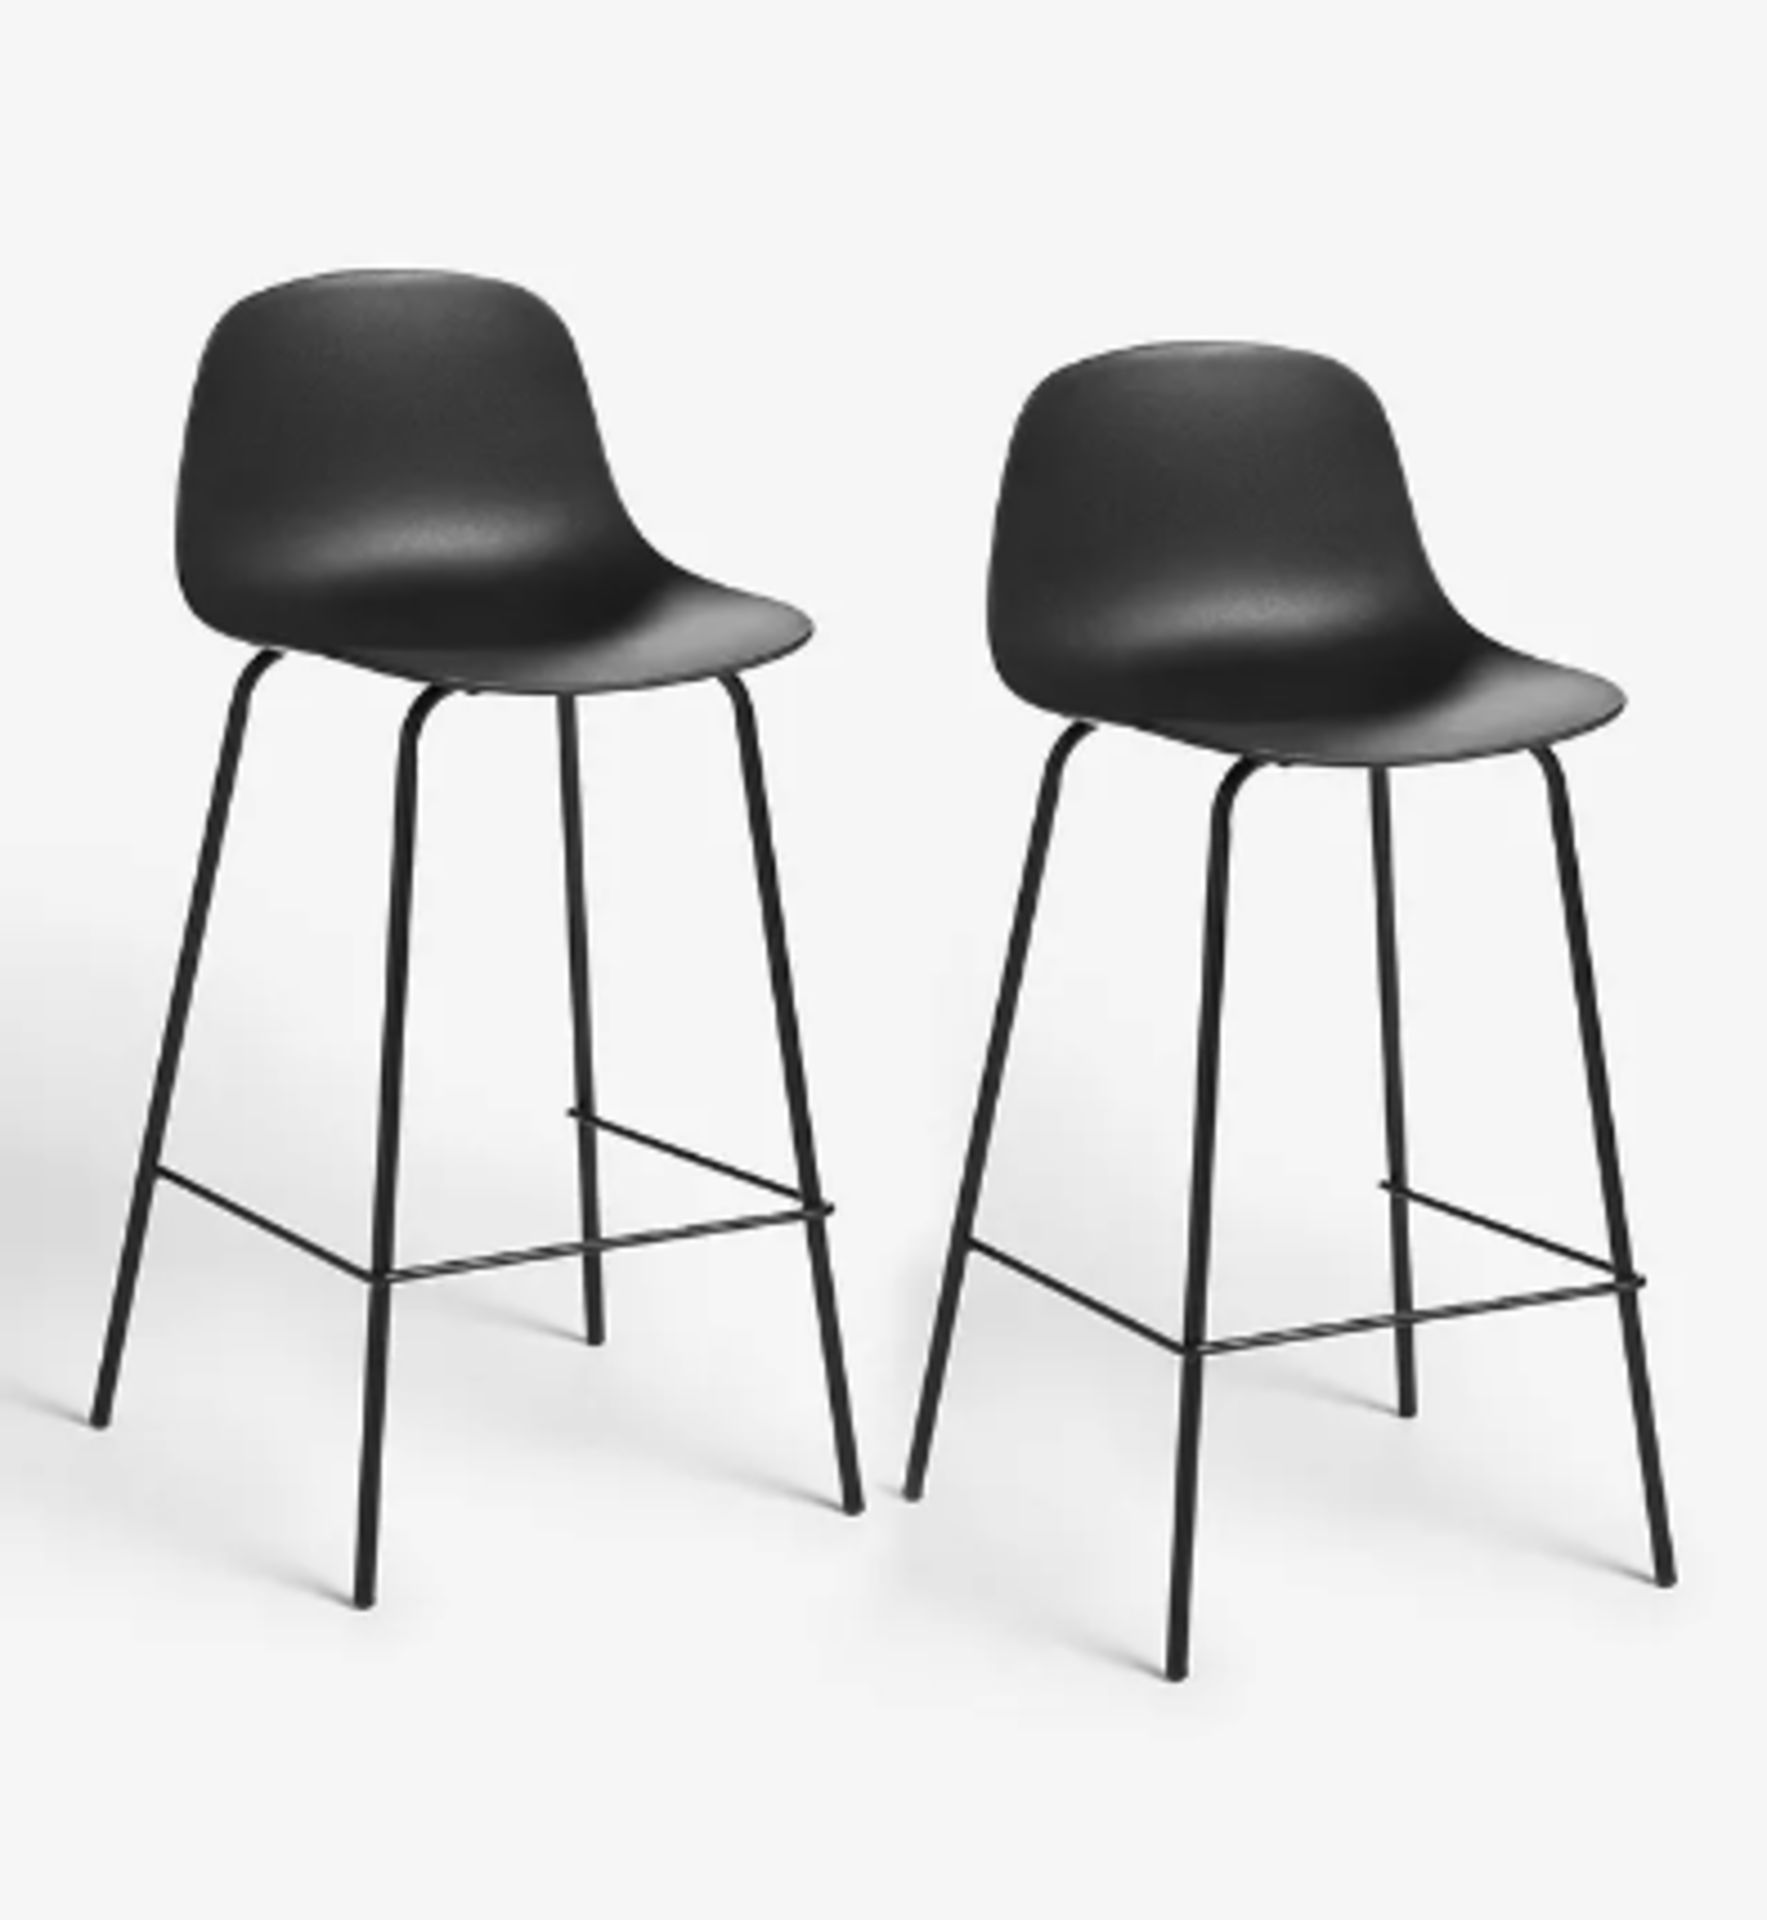 Item Description - John Lewis ANYDAY Whitby Bar Stool, Set of 2 - Stock Number - 83675002...